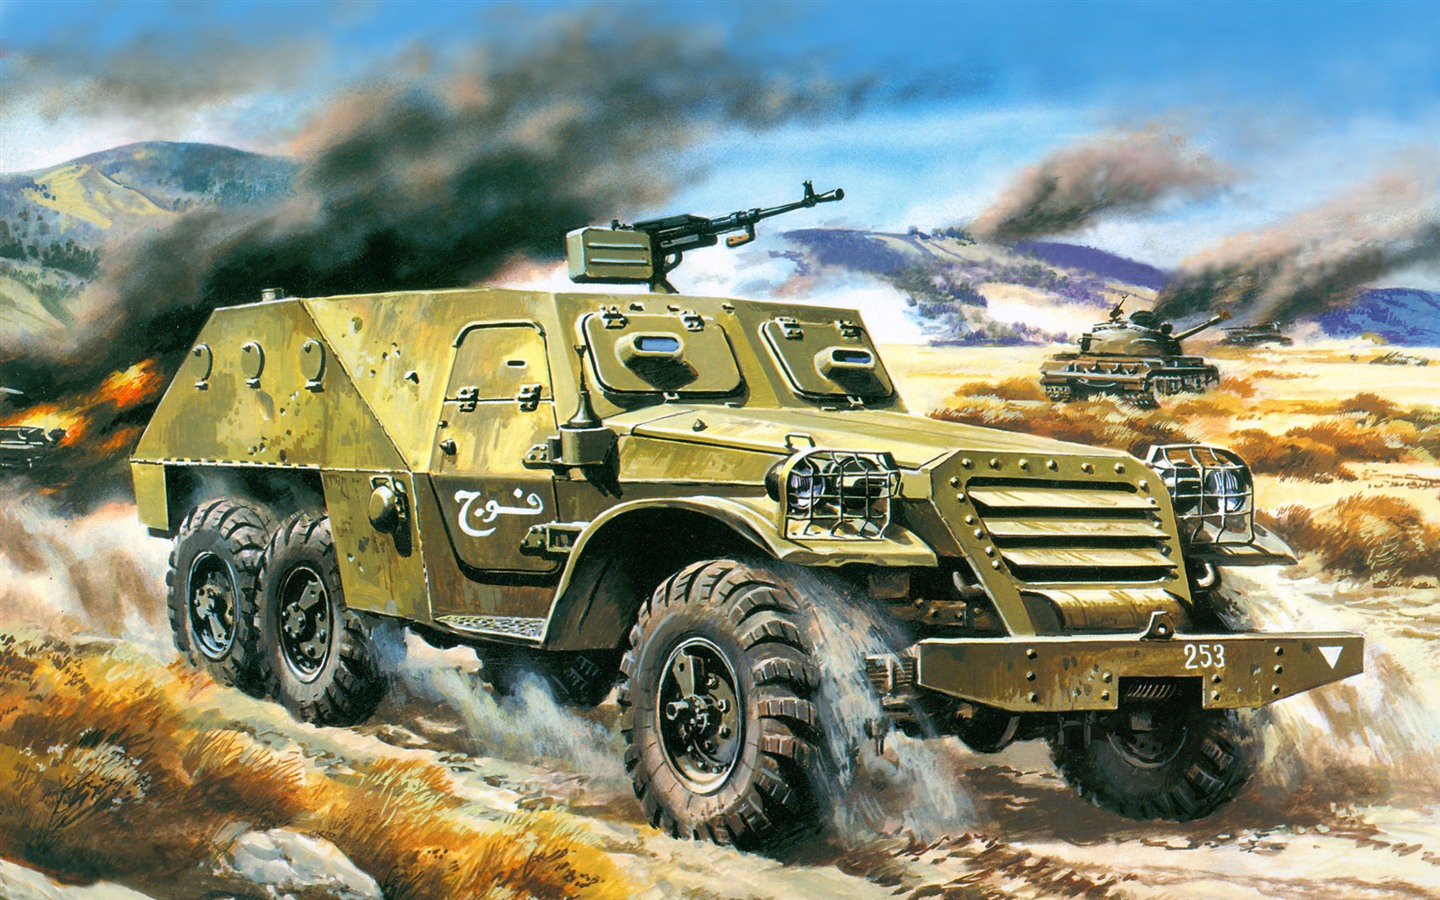 Military tanks, armored HD painting wallpapers #17 - 1440x900